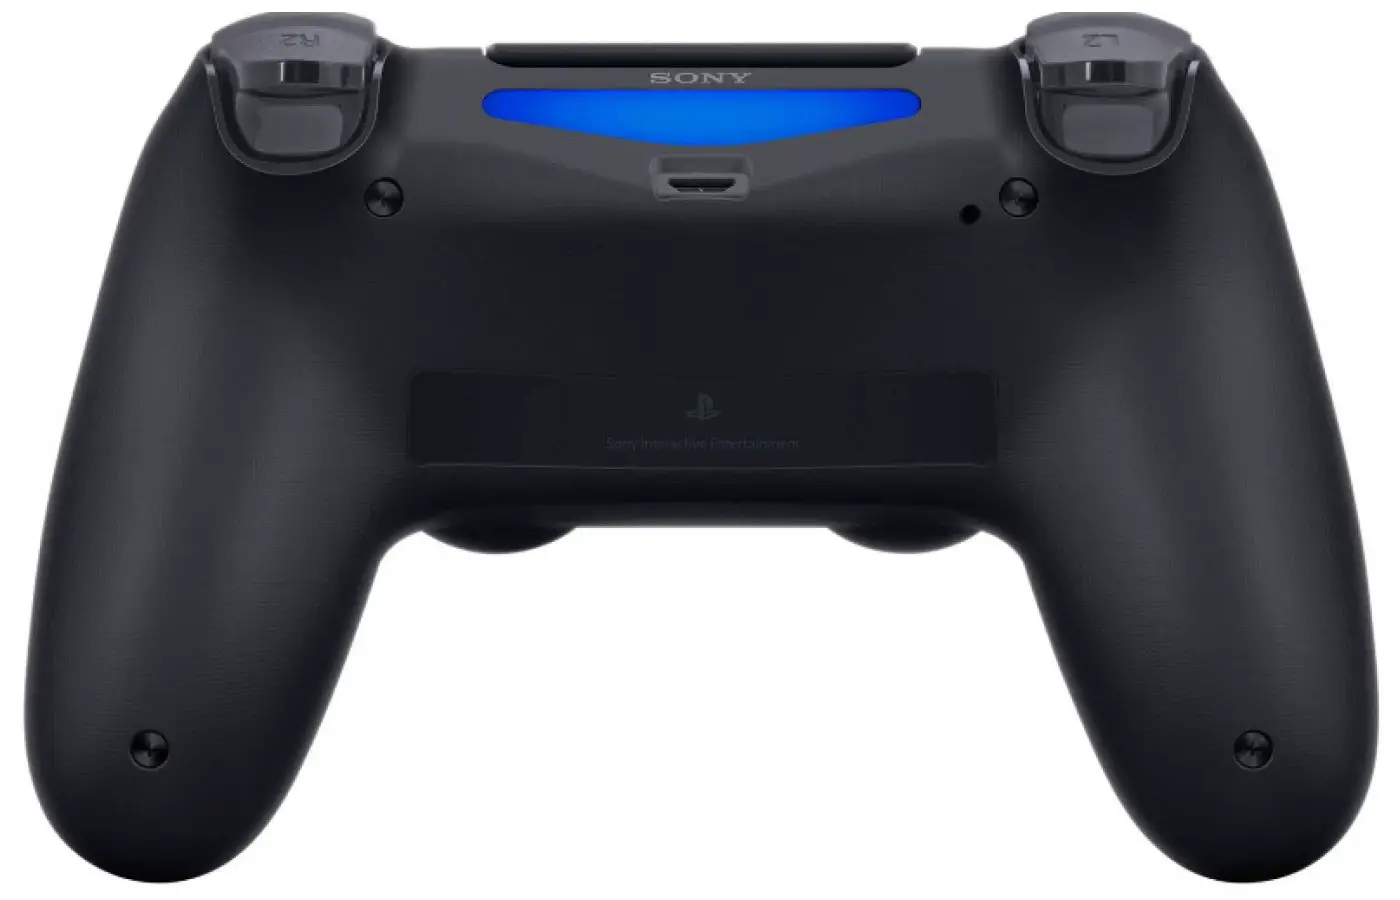 A much smoother appearance than its predecessors, the Dualshock 4 fixes a lot of what was wrong with the DualShock 3.